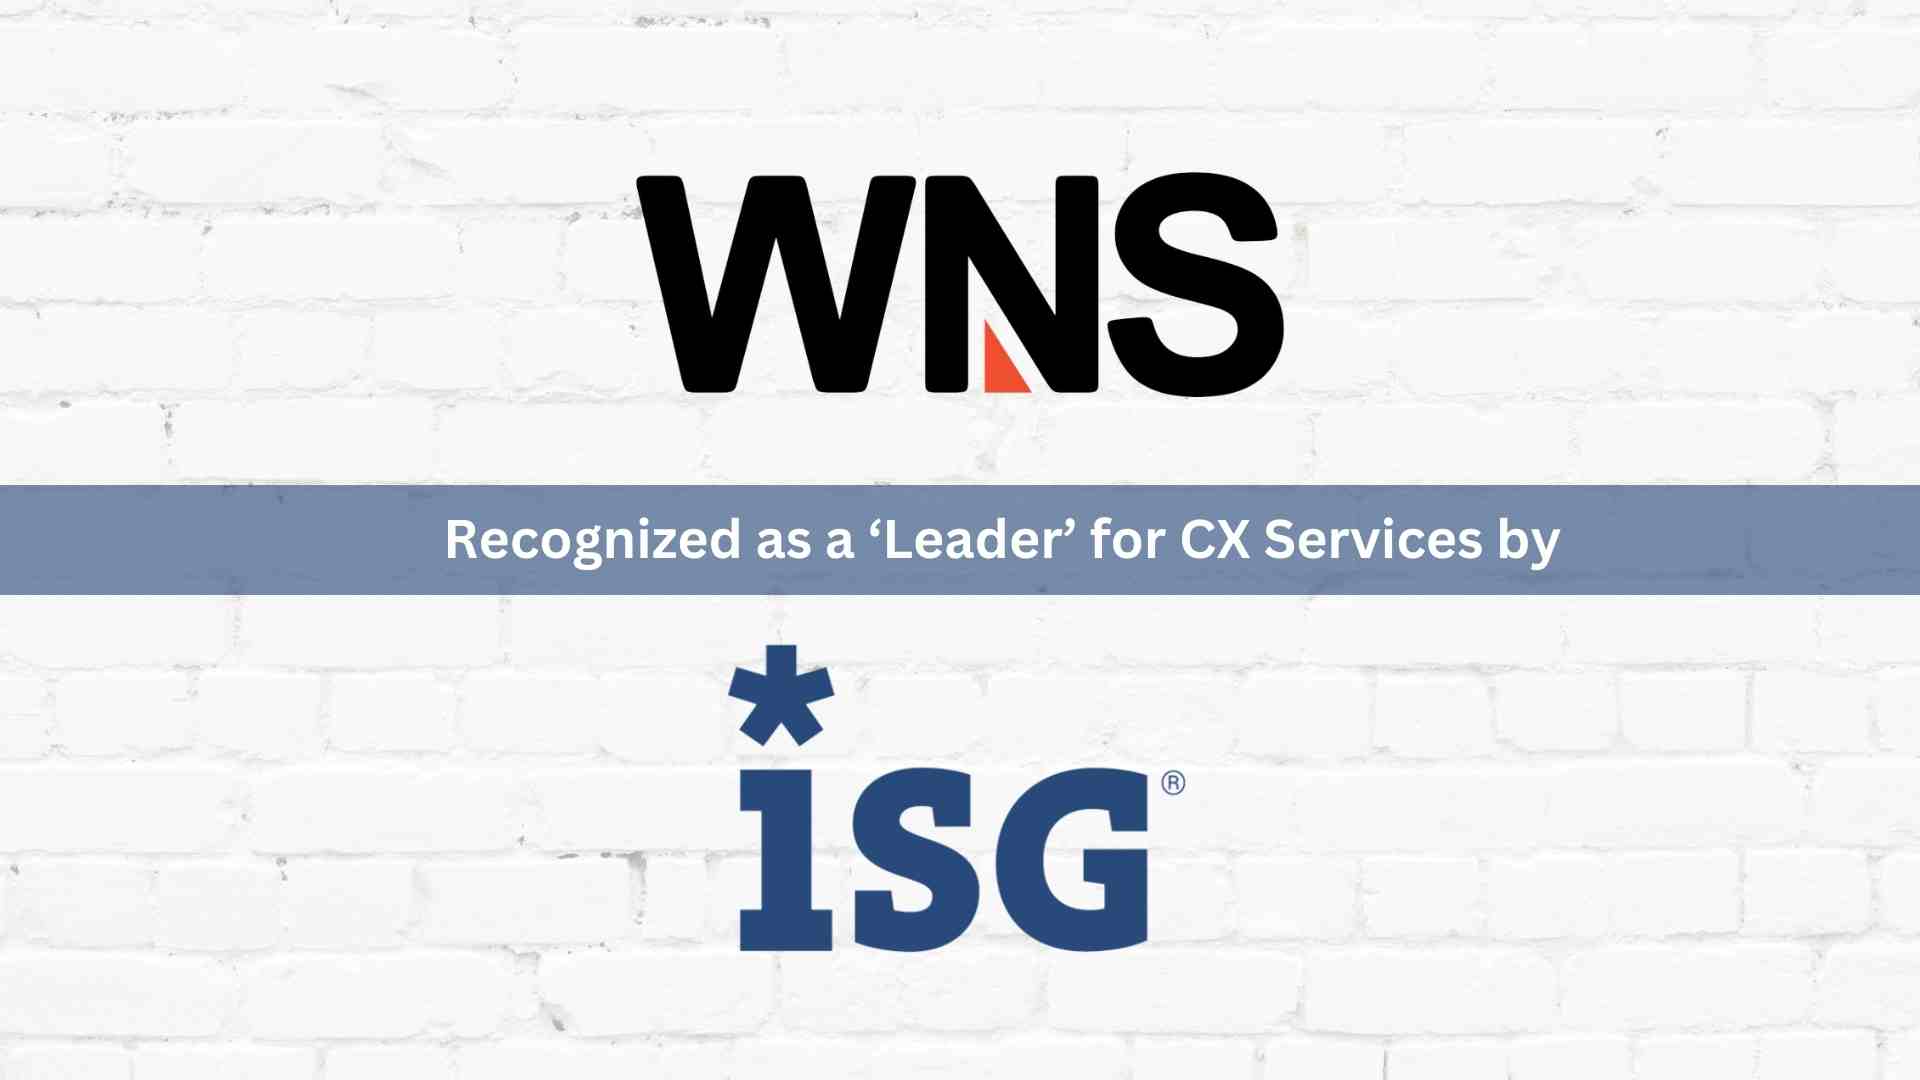 WNS Recognized as a ‘Leader’ for CX Services by ISG